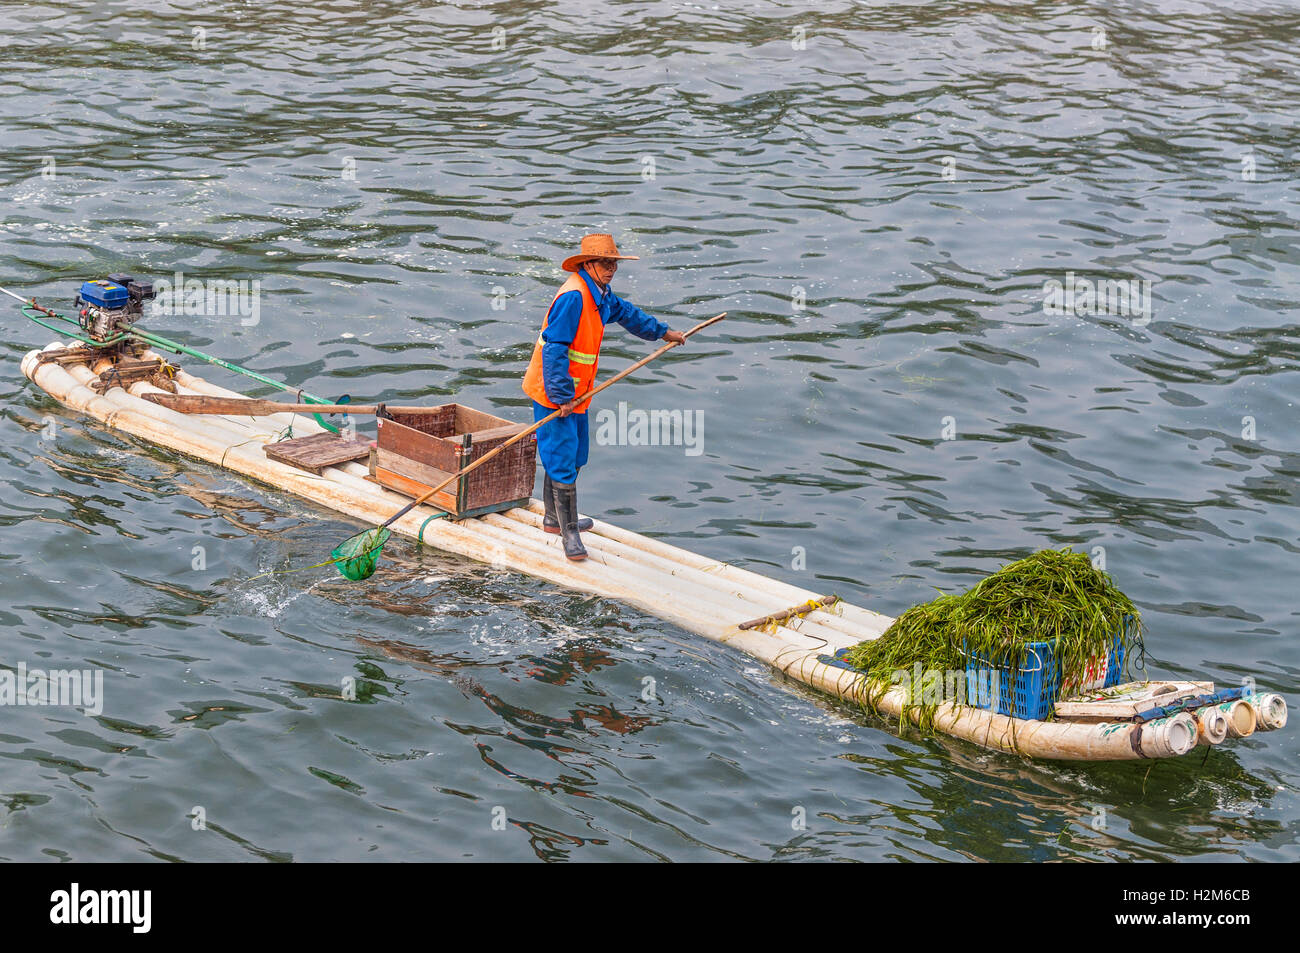 Worker are collecting and removing algae on his bamboo raft from the Li River near Yangshuo Stock Photo